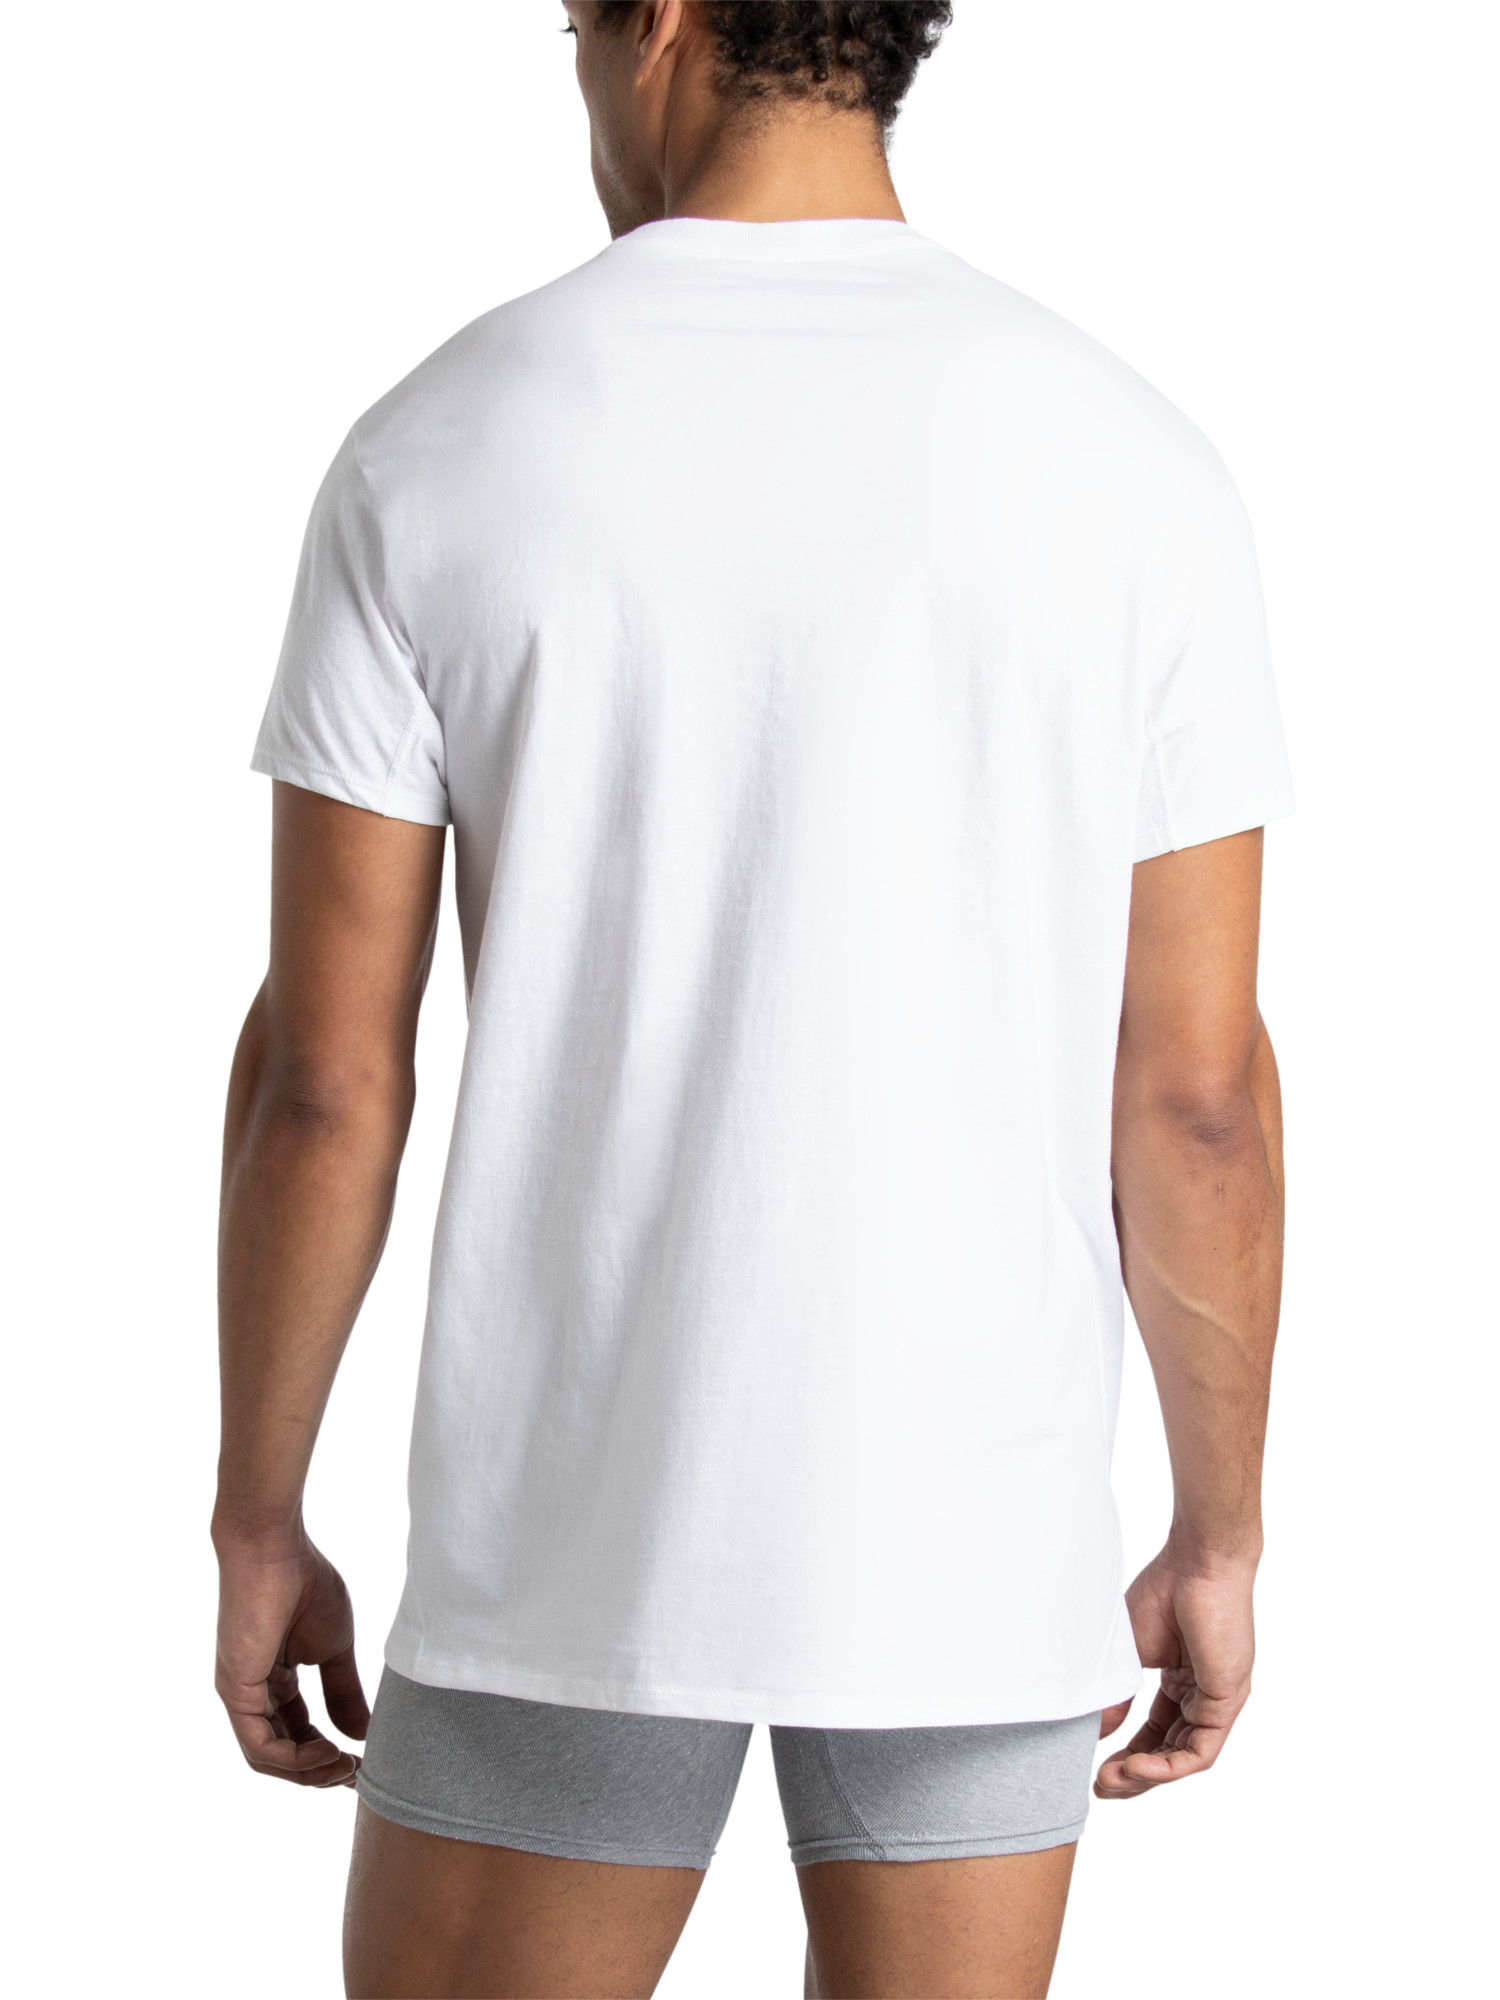 Fruit of the Loom Men's CoolZone Crew Undershirts, 5 Pack - image 4 of 11